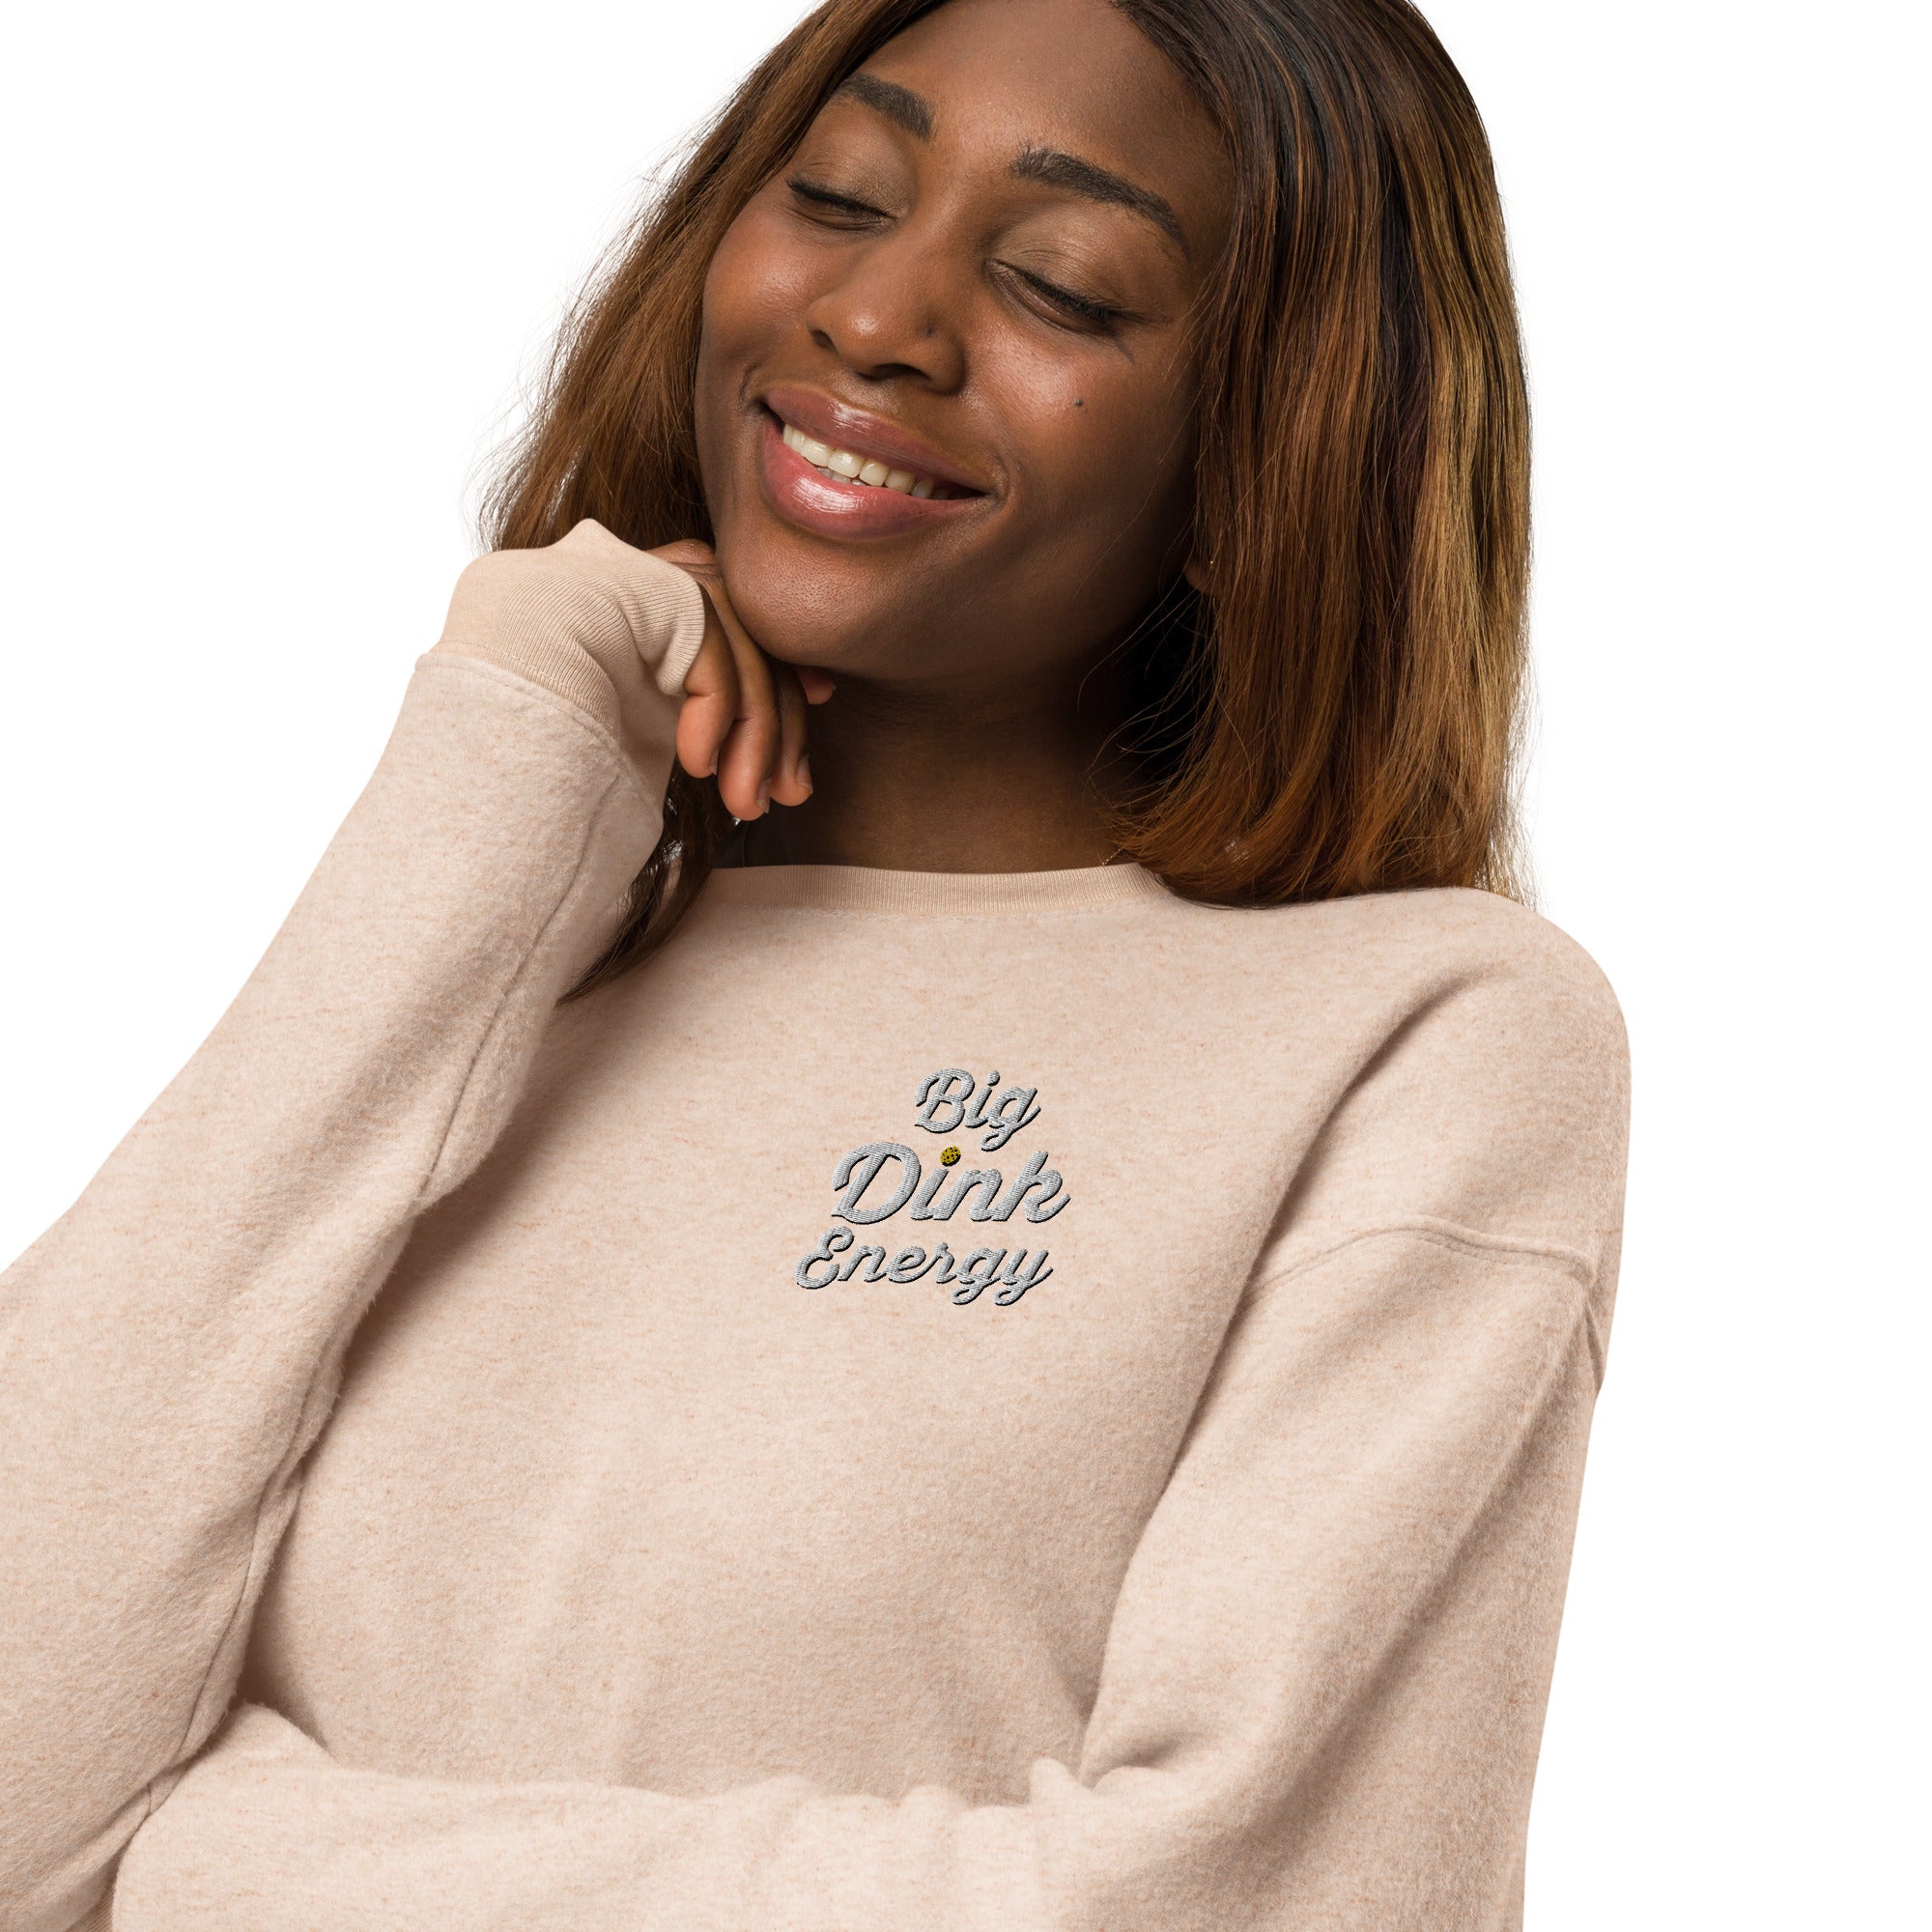 close up of smiling woman wearing light peach fleece embroidered big dink energy pickleball sweater apparel